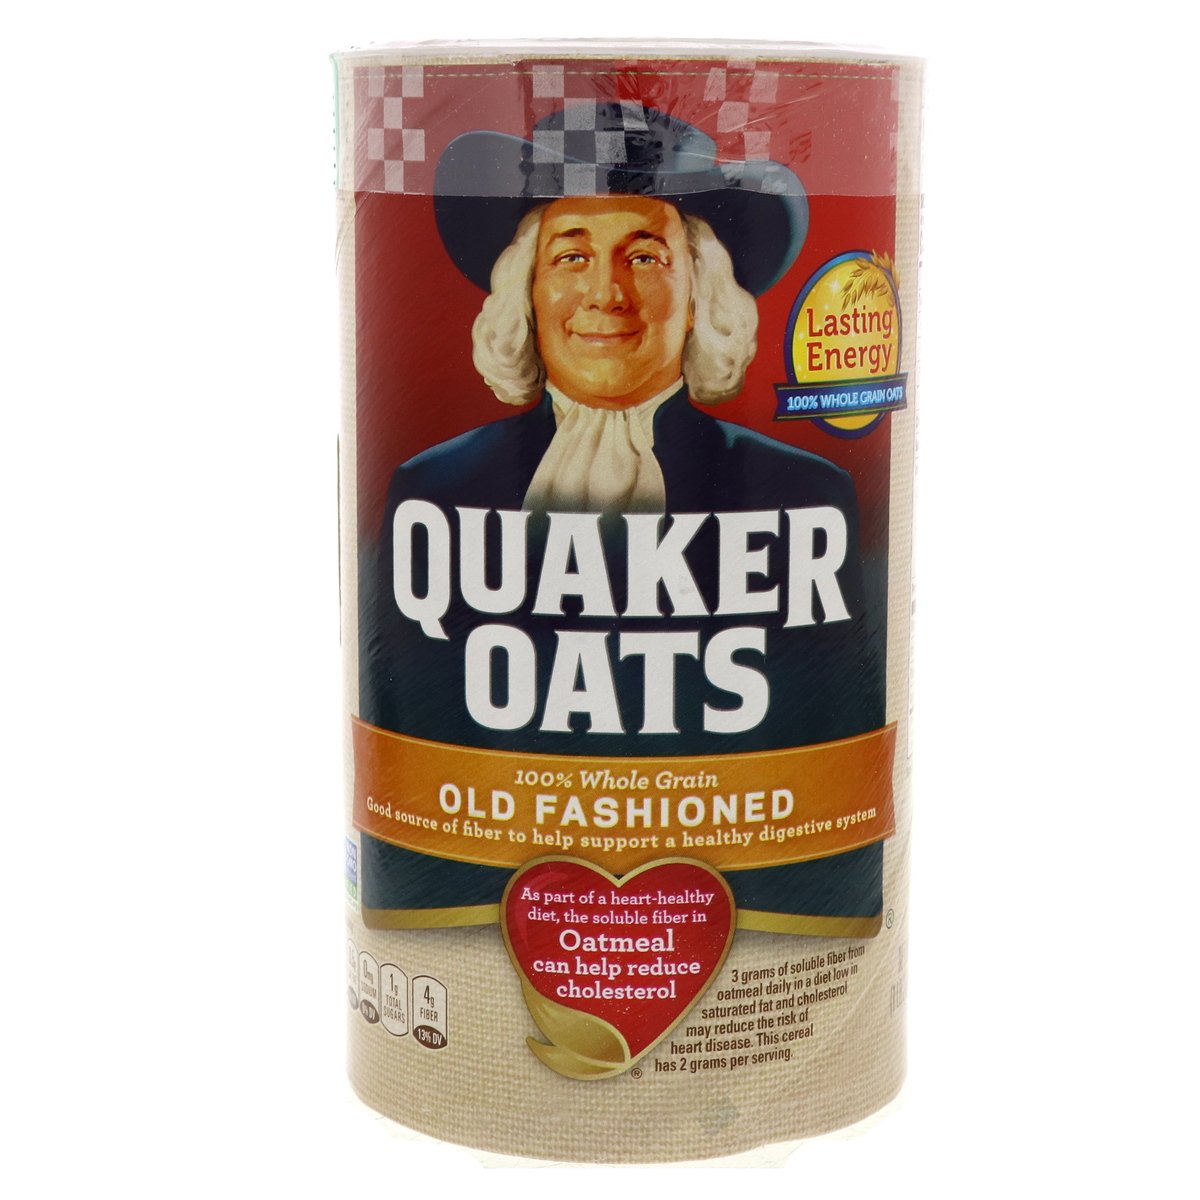 Quaker Oats Old Fashioned 100% Whole Grain Oacts 510 g